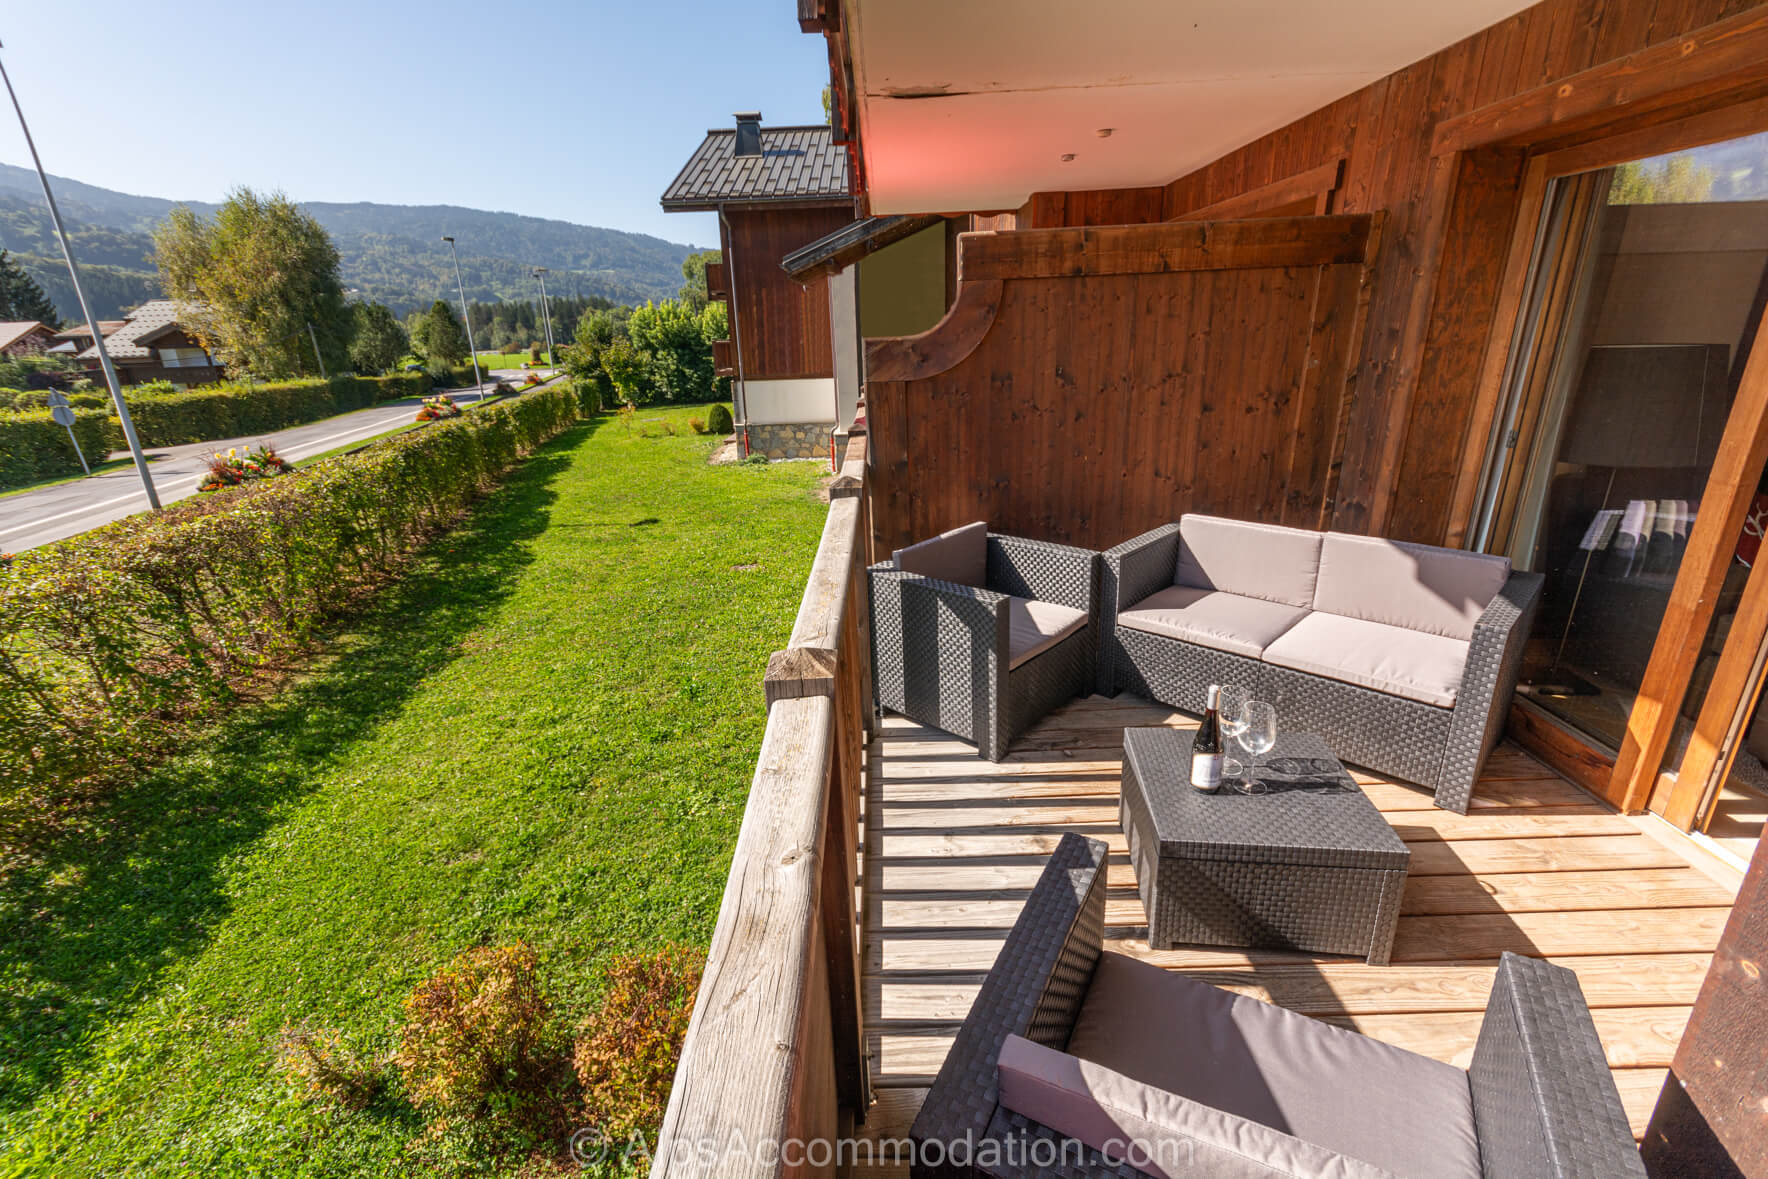 Chardons Argentes G6 Samoëns - South facing balcony with comfortable seating